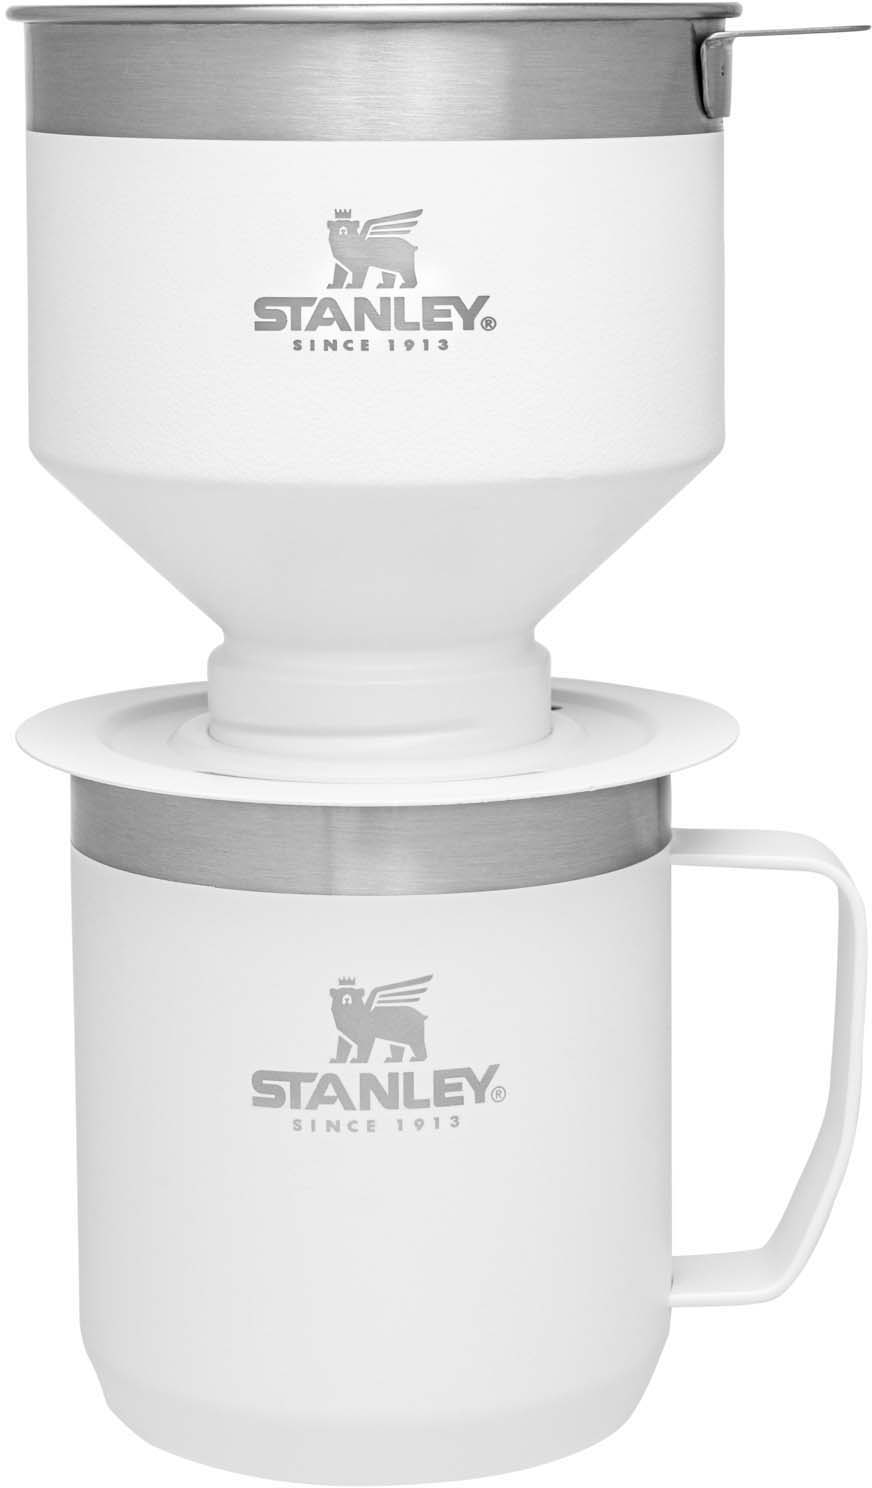 https://op2.0ps.us/original/opplanet-stanley-the-camp-pour-over-set-polar-10-09566-014-main